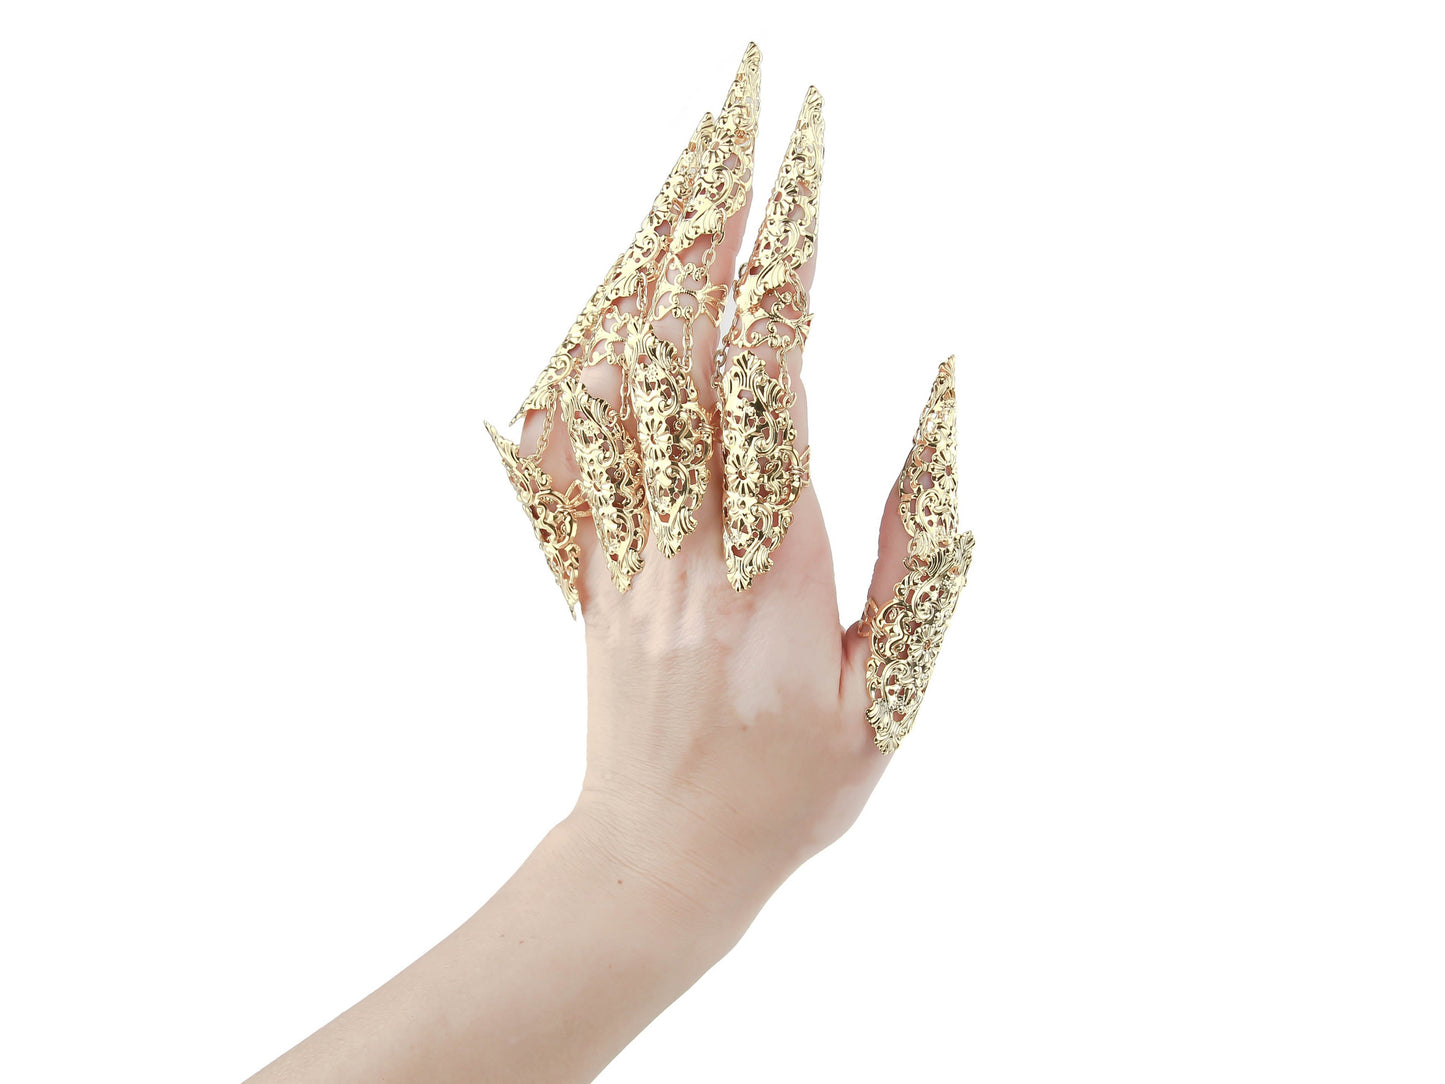 A hand is strikingly adorned with Myril Jewels' dark, gothic-chic finger armor rings in gold tone, intricately designed with a whimsigoth lace pattern. Perfect for Halloween, punk, and neo-gothic styles, or as a bold witchcore statement piece, these rings embody a fusion of gothic lolita elegance and alternative fashion.